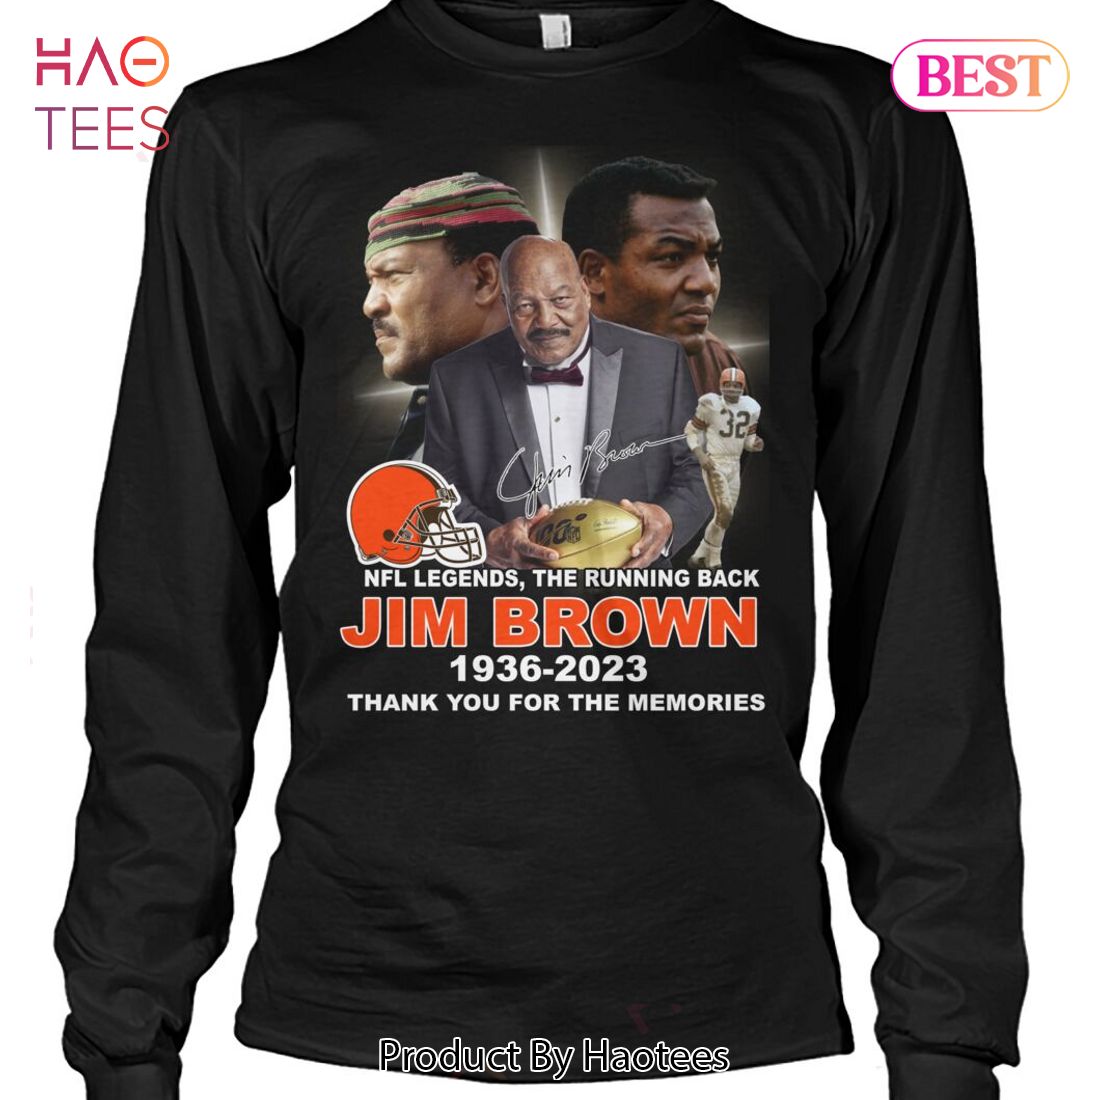 NEW Jim Brown 1936-2023 Thank You For The Memories T-Shirt